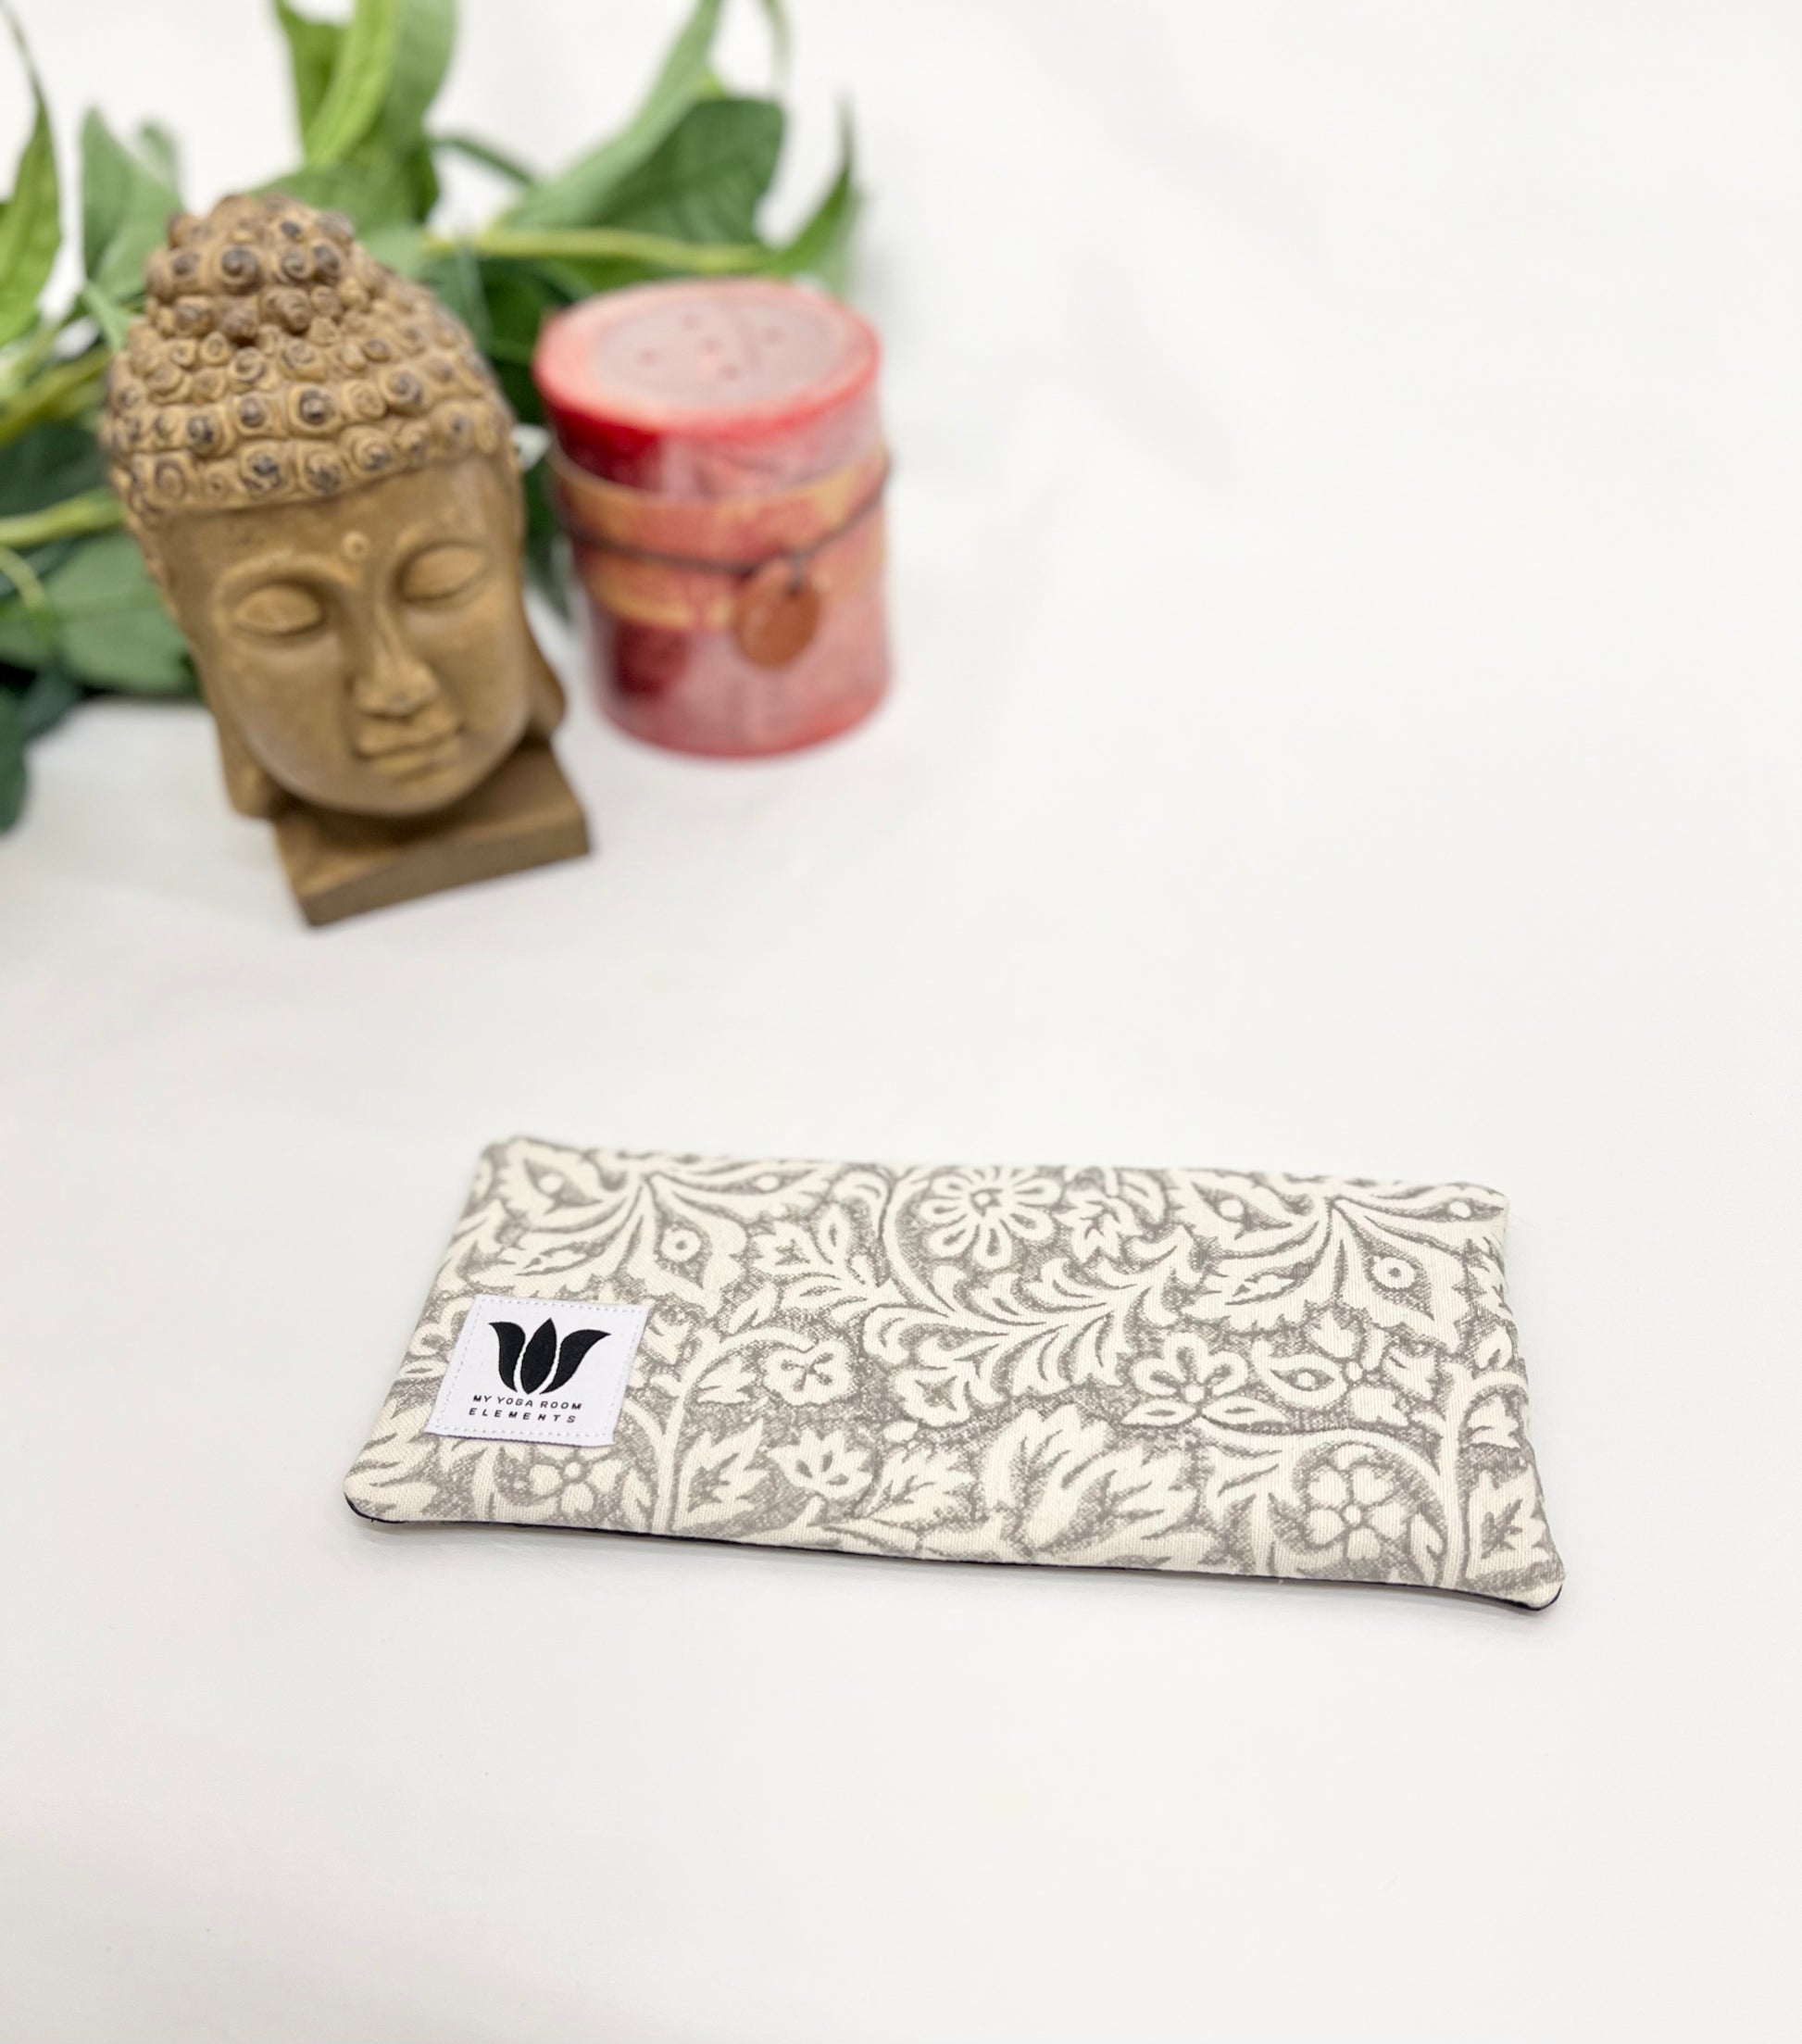 Unscented Eye Pillow in  Two Tone Grey and White Floral Print 100% cotton and organic bamboo fabric. Made in Canada by My Yoga Room Elements